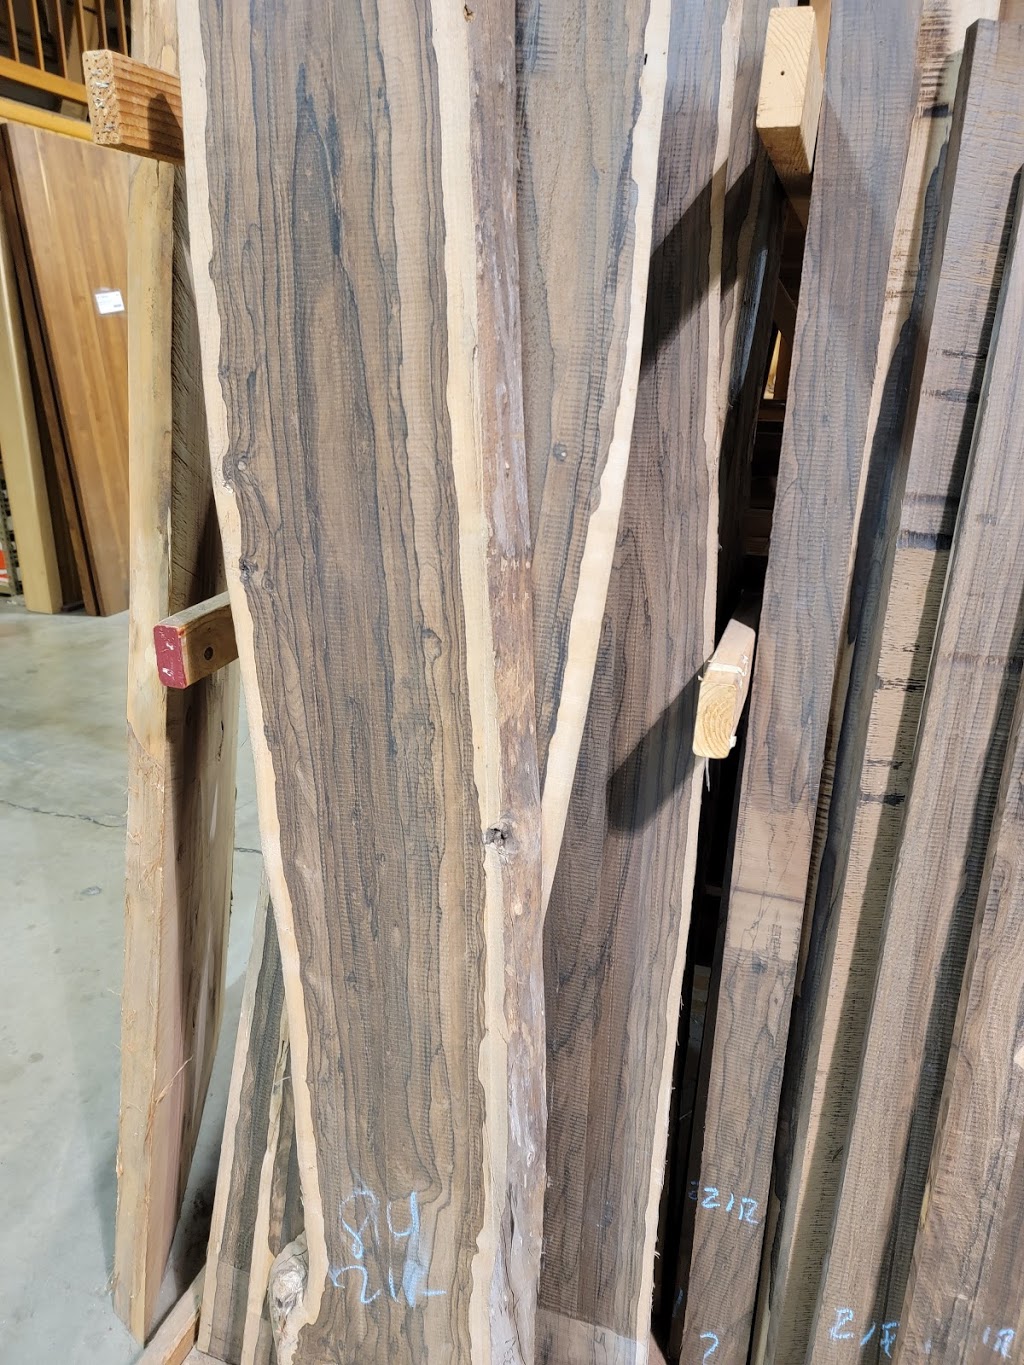 Crosscut Hardwoods | 3065 NW Front Ave, Portland, OR 97210, USA | Phone: (503) 224-9663